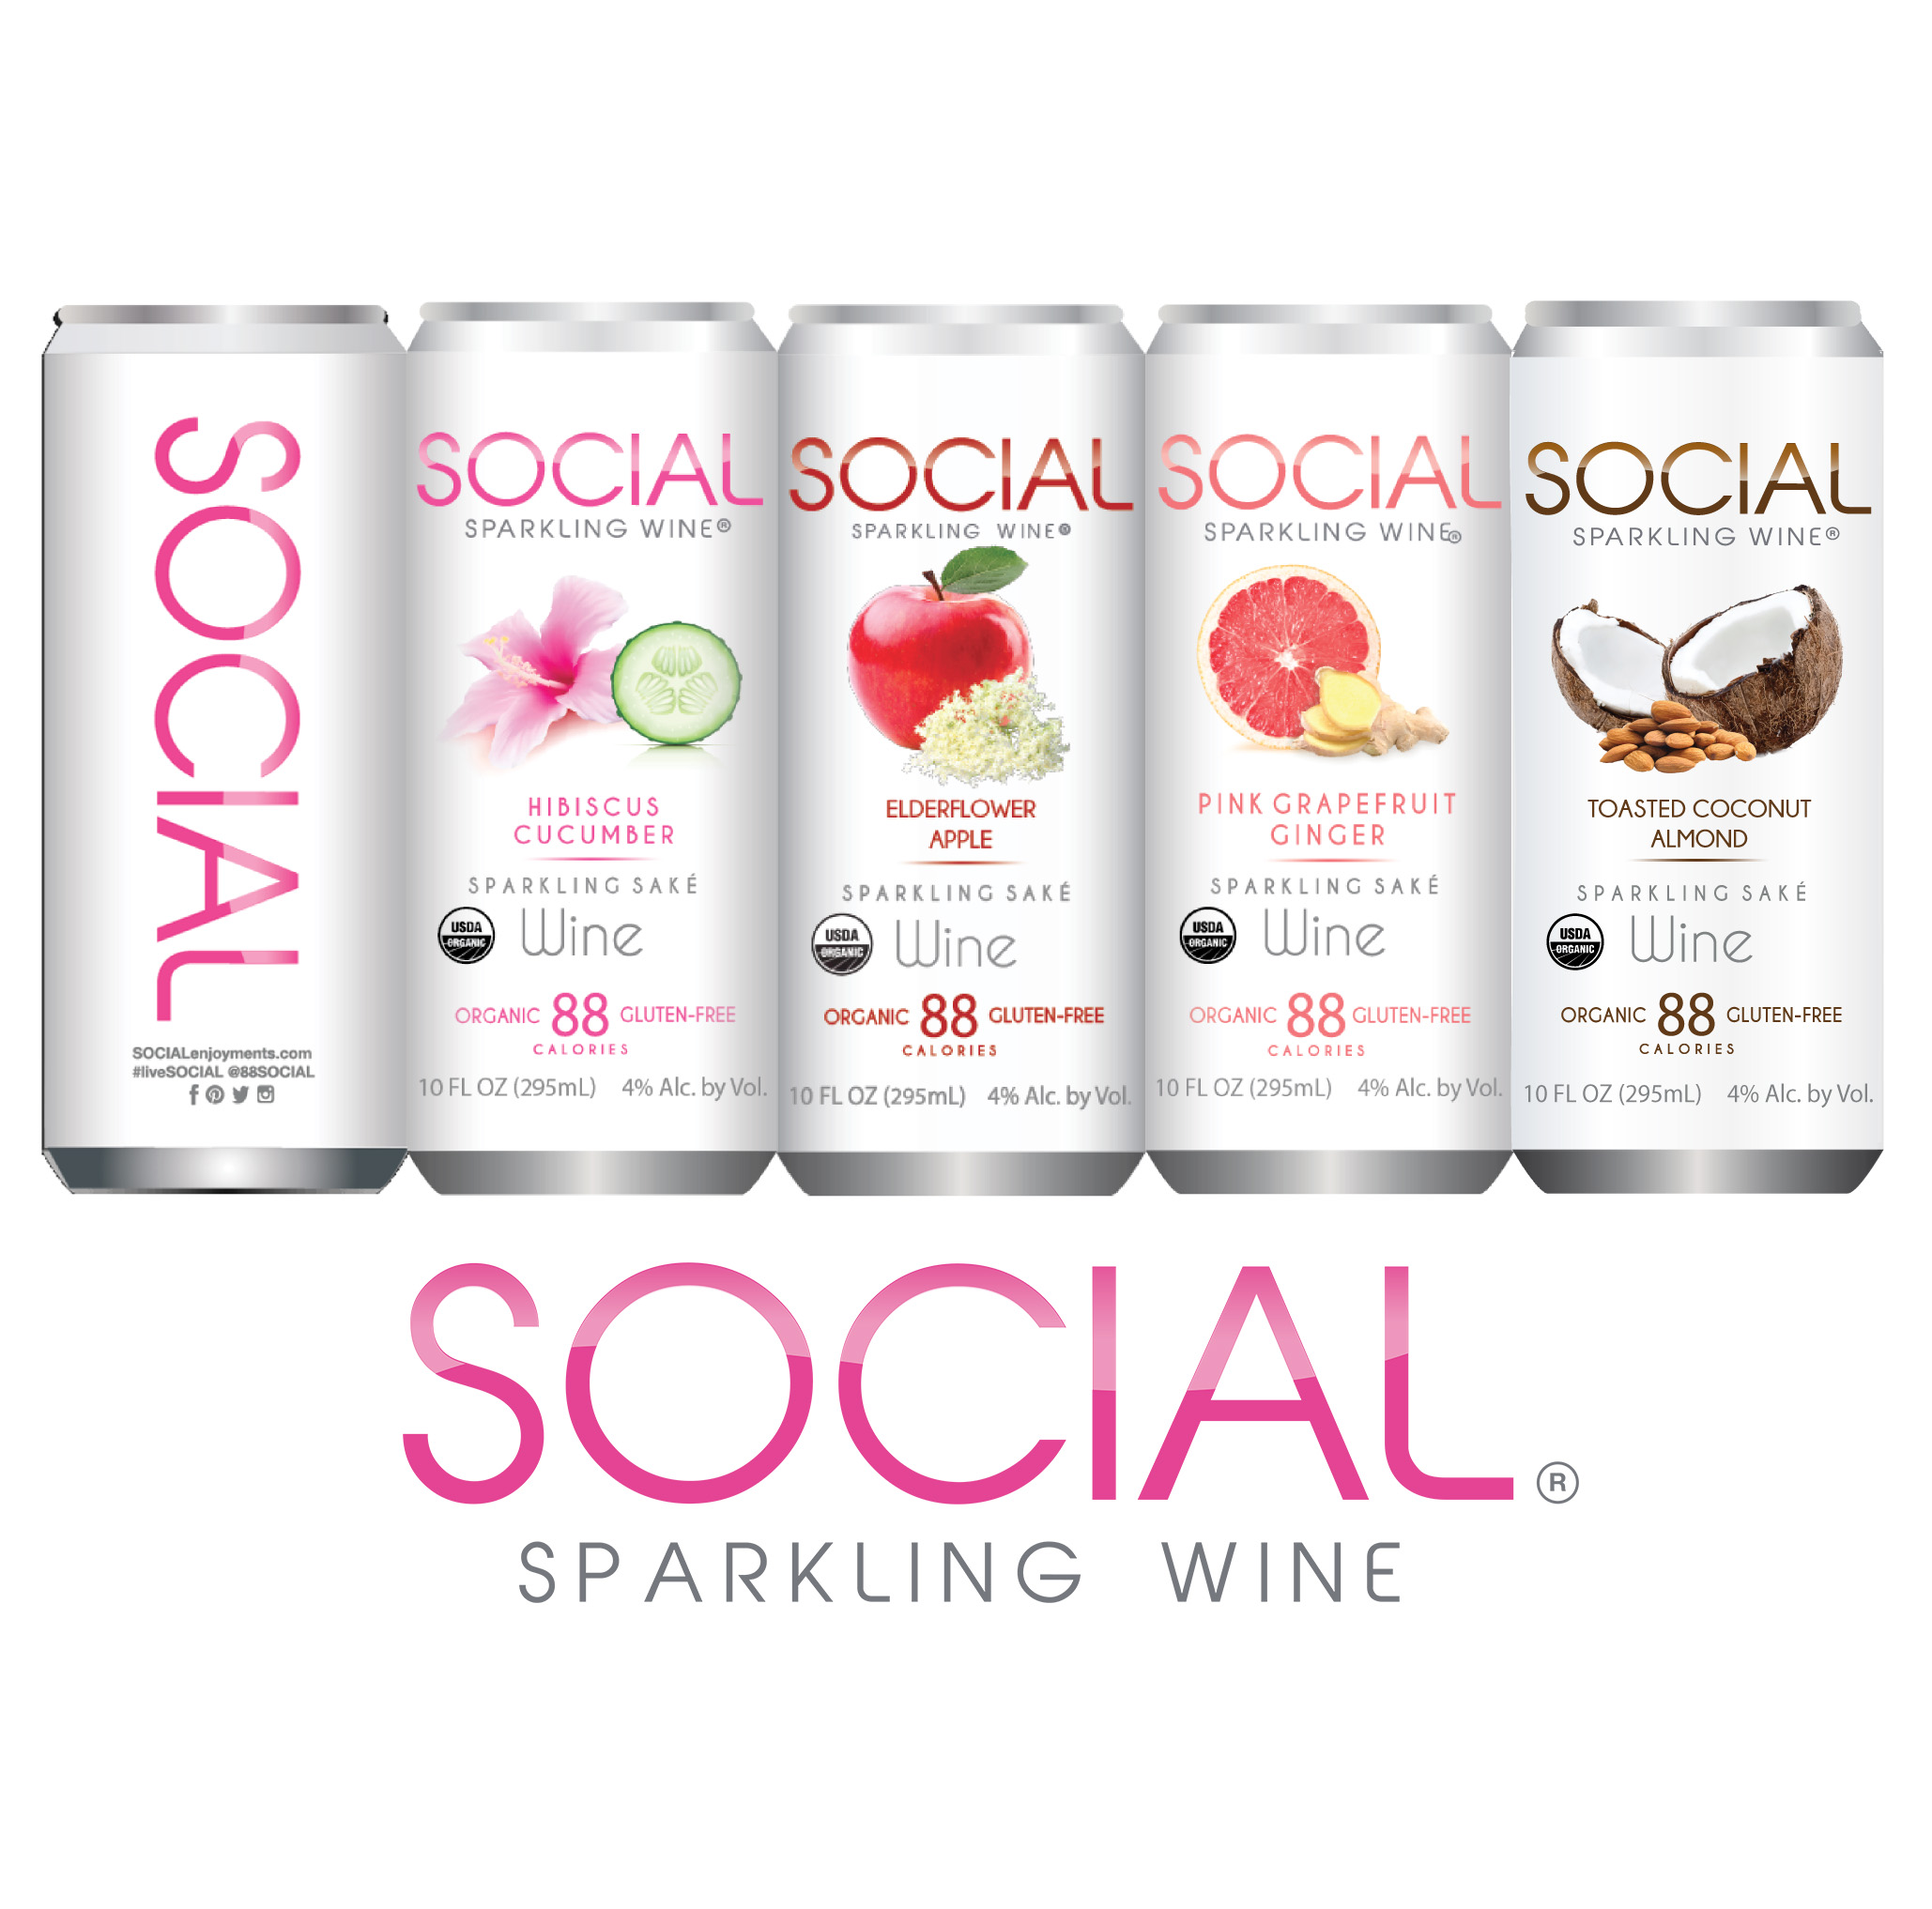 Social Sparkling Wine's line of healthy alcoholic beverages